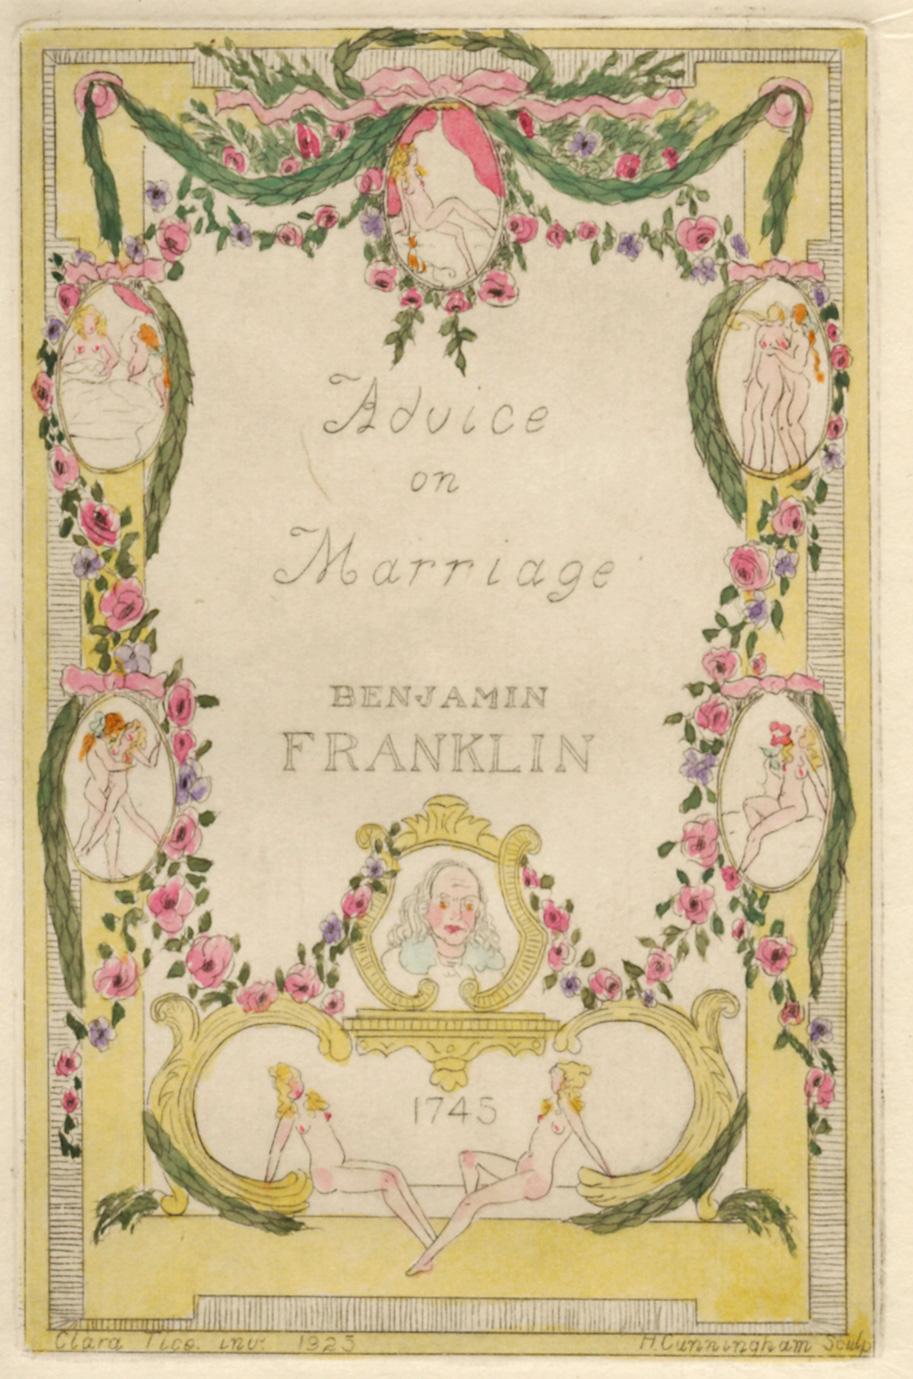 Tice, Clara and Benjamin Franklin
ADVICE ON MARRIAGE
Philadelphia & Brooklyn: Harry Cunningham, 1925. Limited Edition. 
Octavo, 9 x 6 1/2 inches (227 x 165 mm); number 40 of 50 copies on Japon, drawn, etched, and hand-coloured throughout by Clara